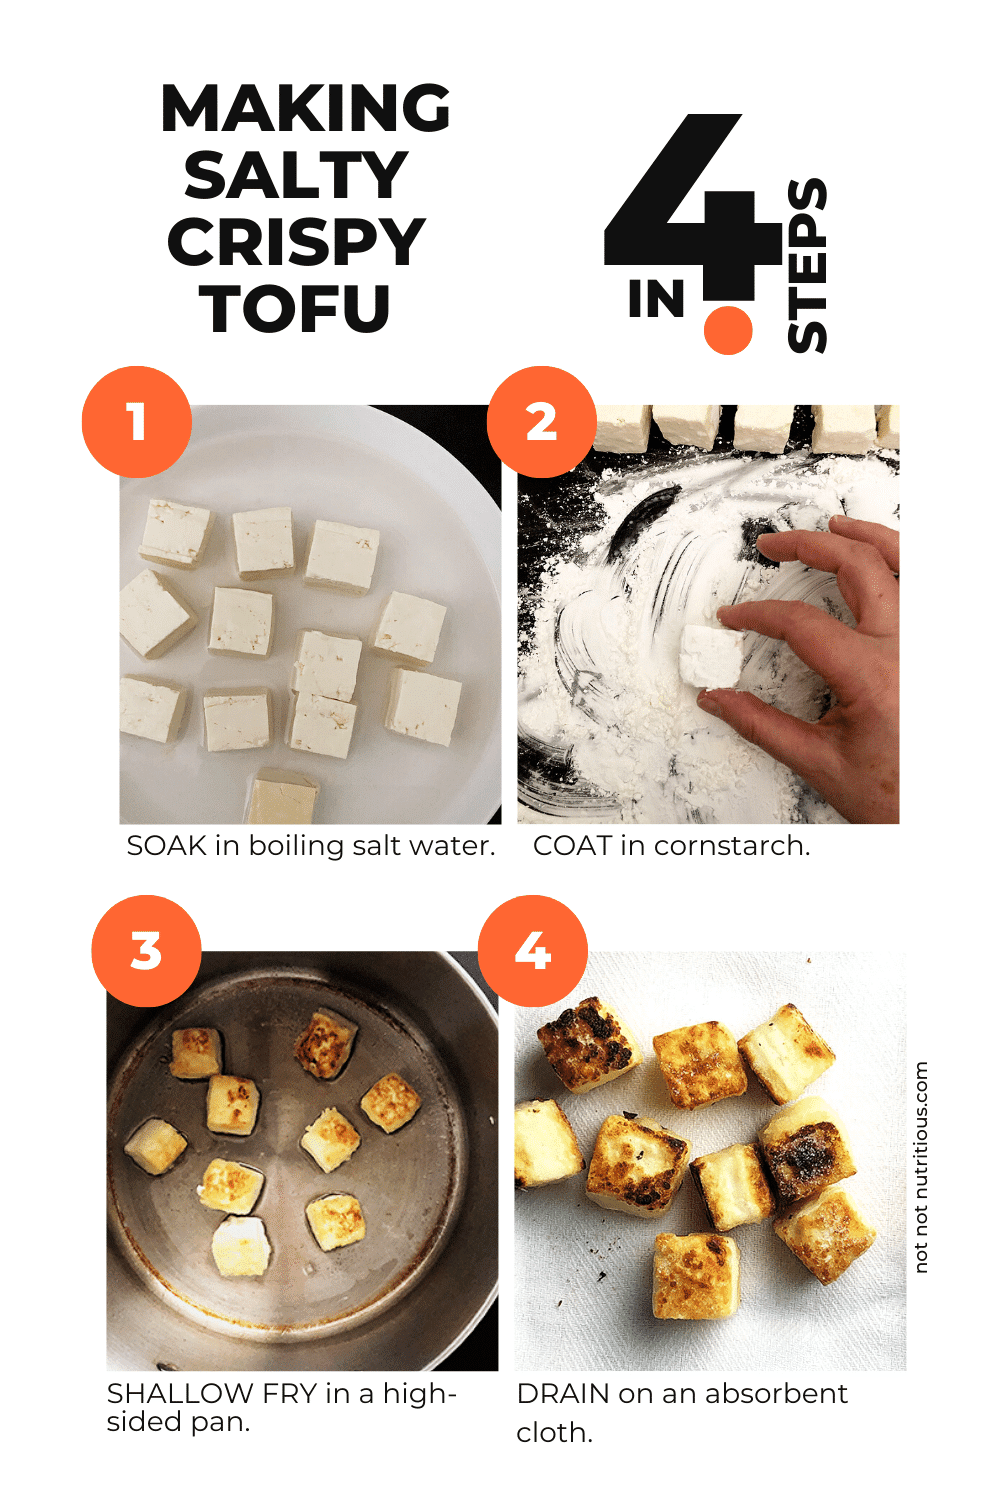 Graphic showing 4 steps for making Salty Crispy Tofu - Step 1 is soak the tofu in boiling salt water. Step 2 is coat in cornstarch. Step 3 is shallow-fry in oil. Step 4 is drain on absorbent cloth.